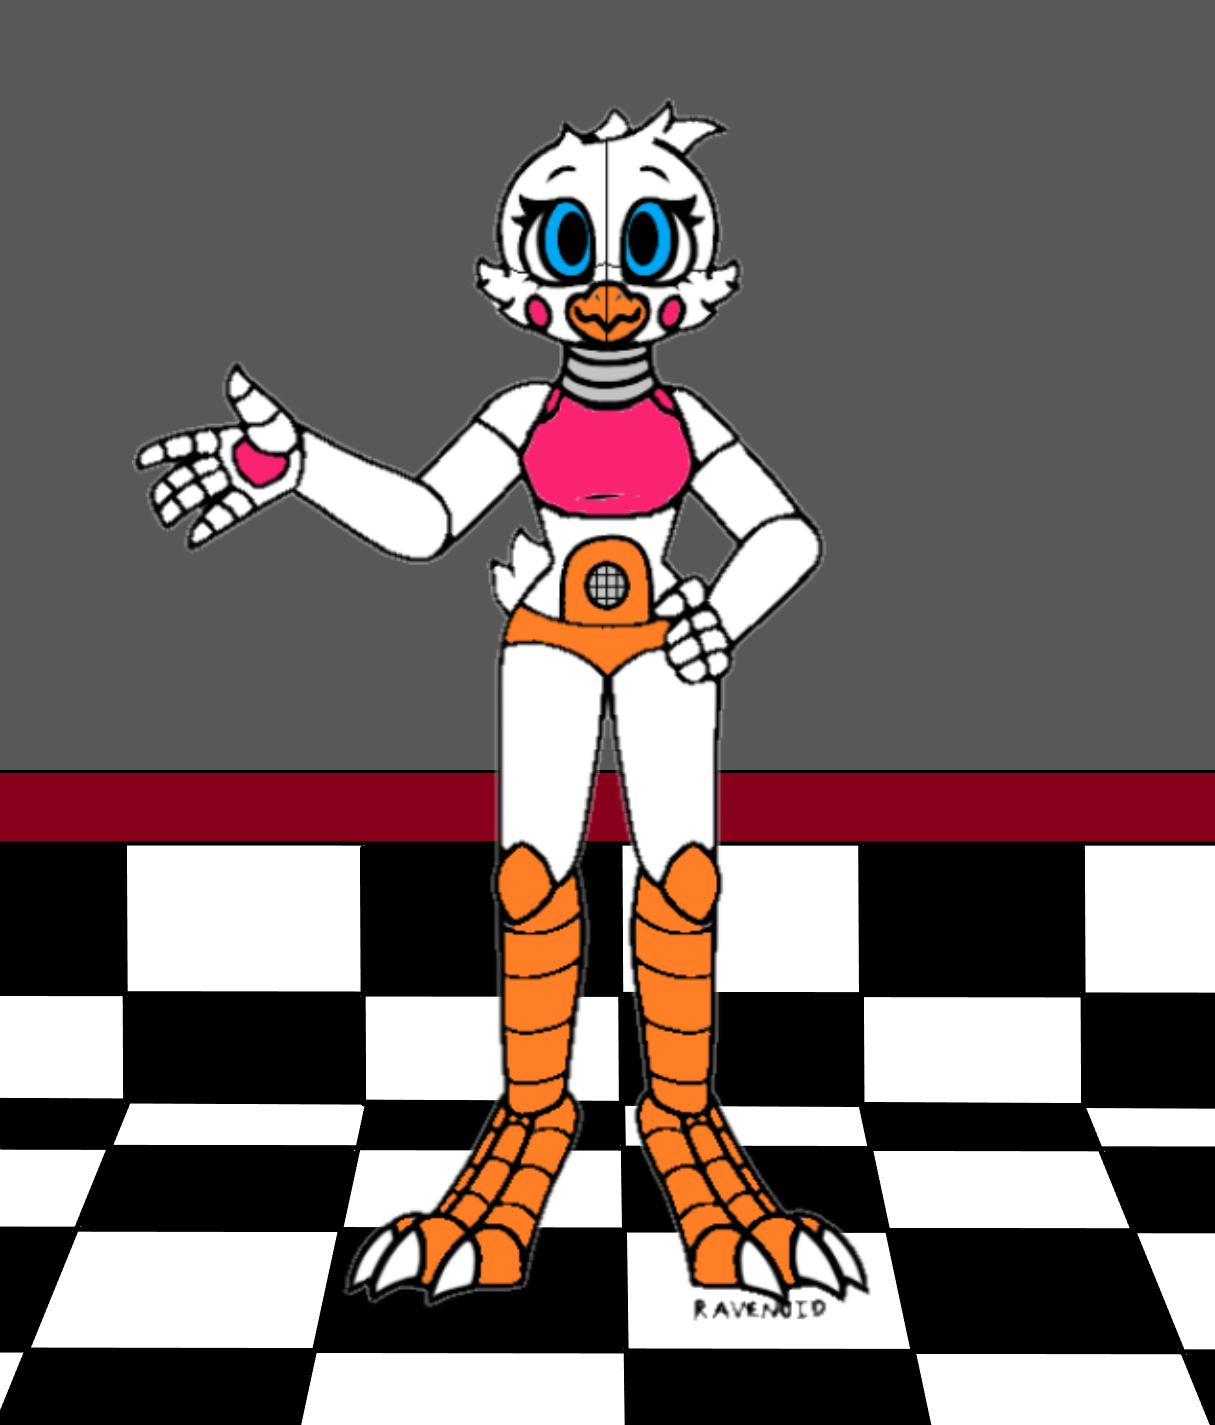 Pikl_Baka / Funtime Chica #TeamTreat